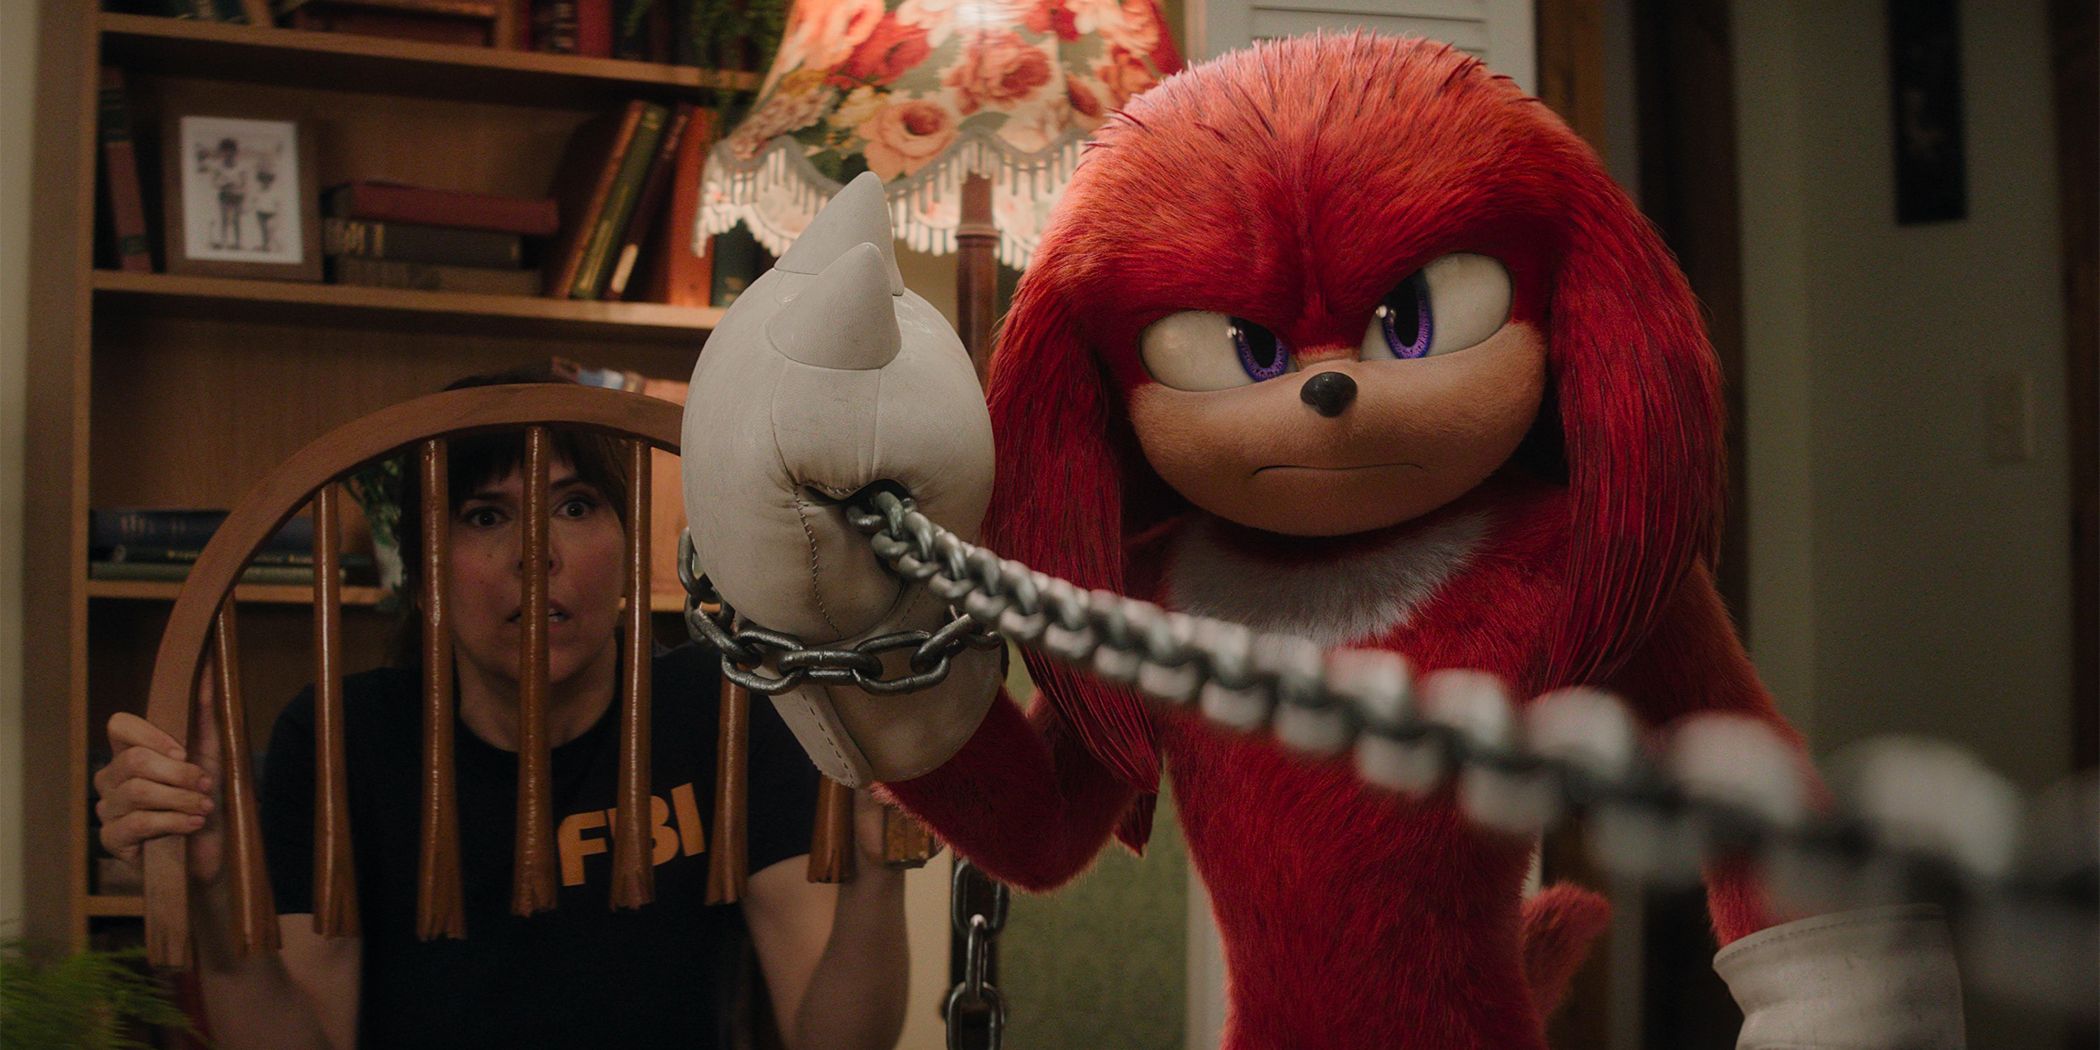 Wanda Whipple hiding behind a broken chair while Knuckles fights with a silver chain